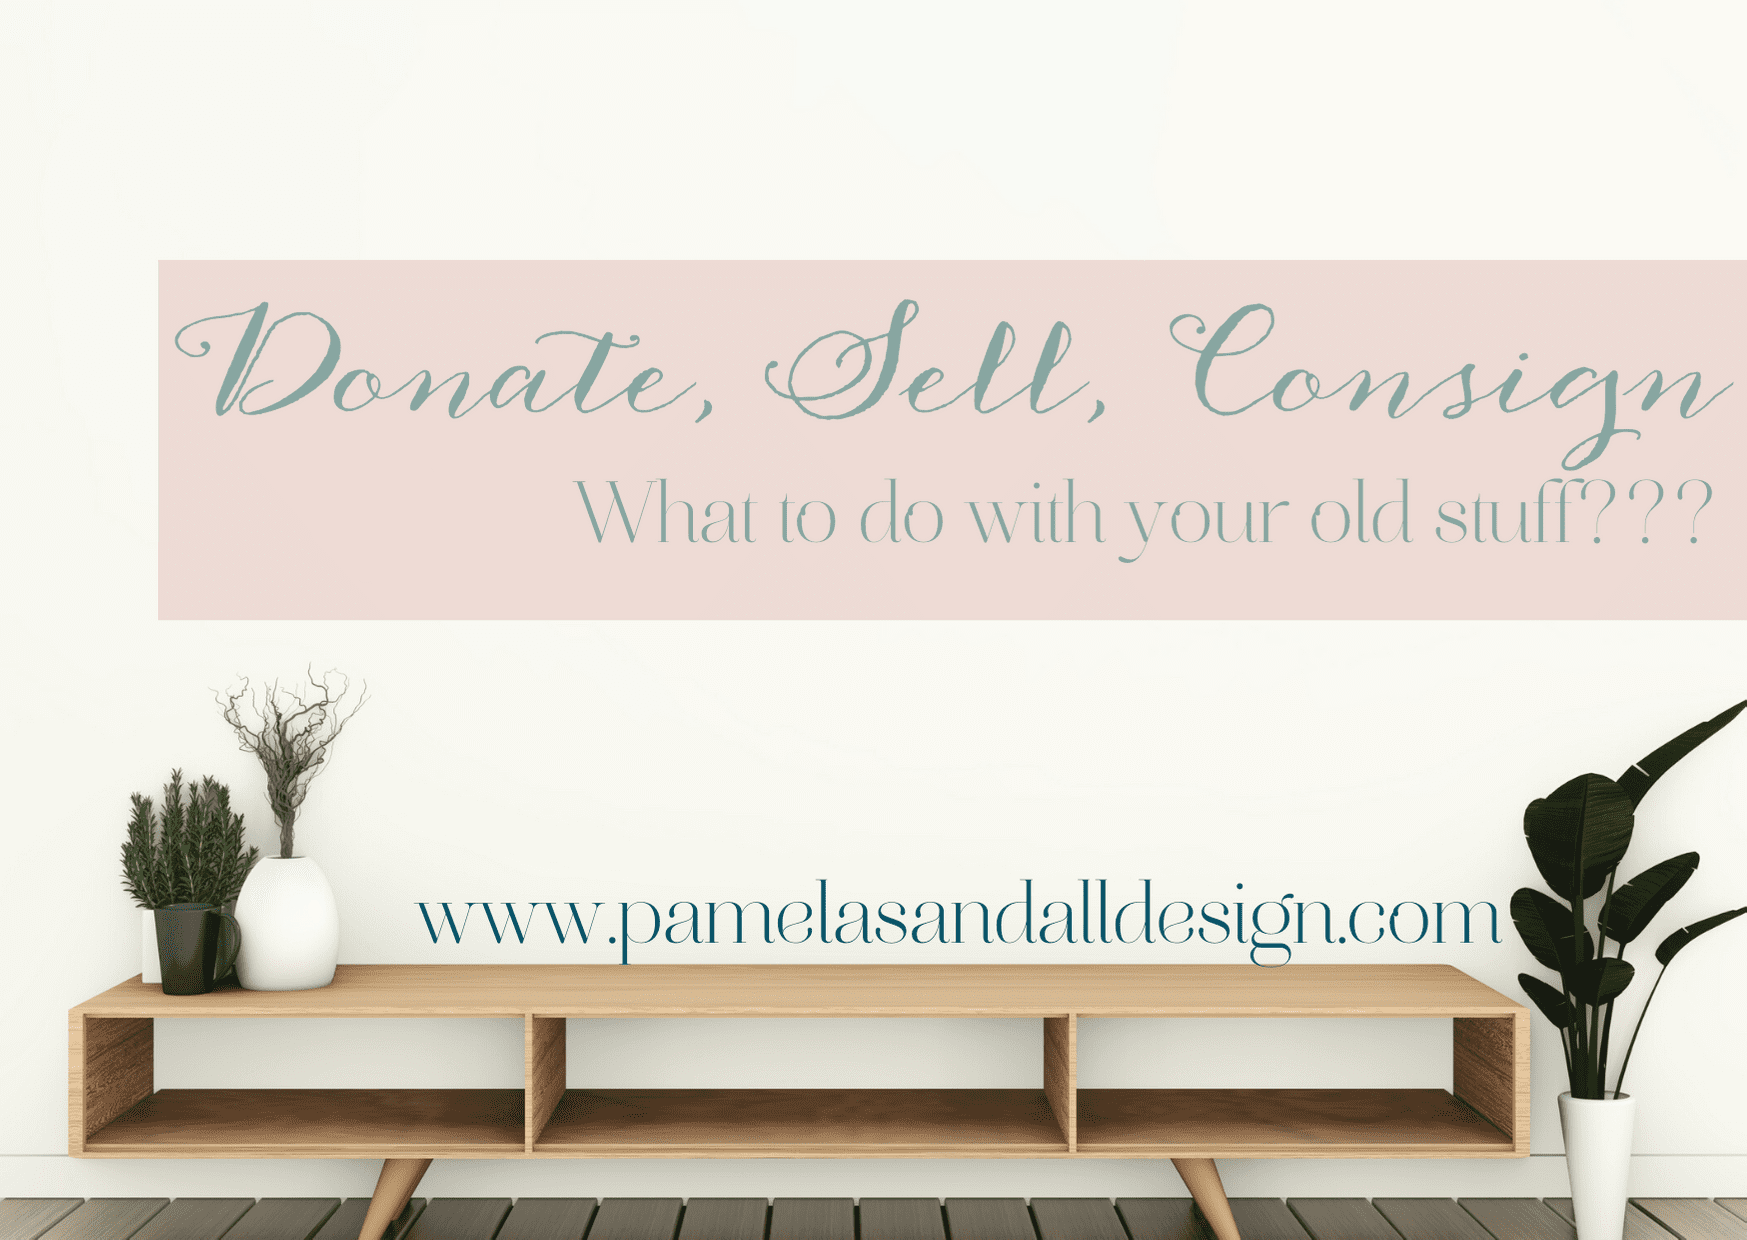 Donate, sell, consign – oh my!